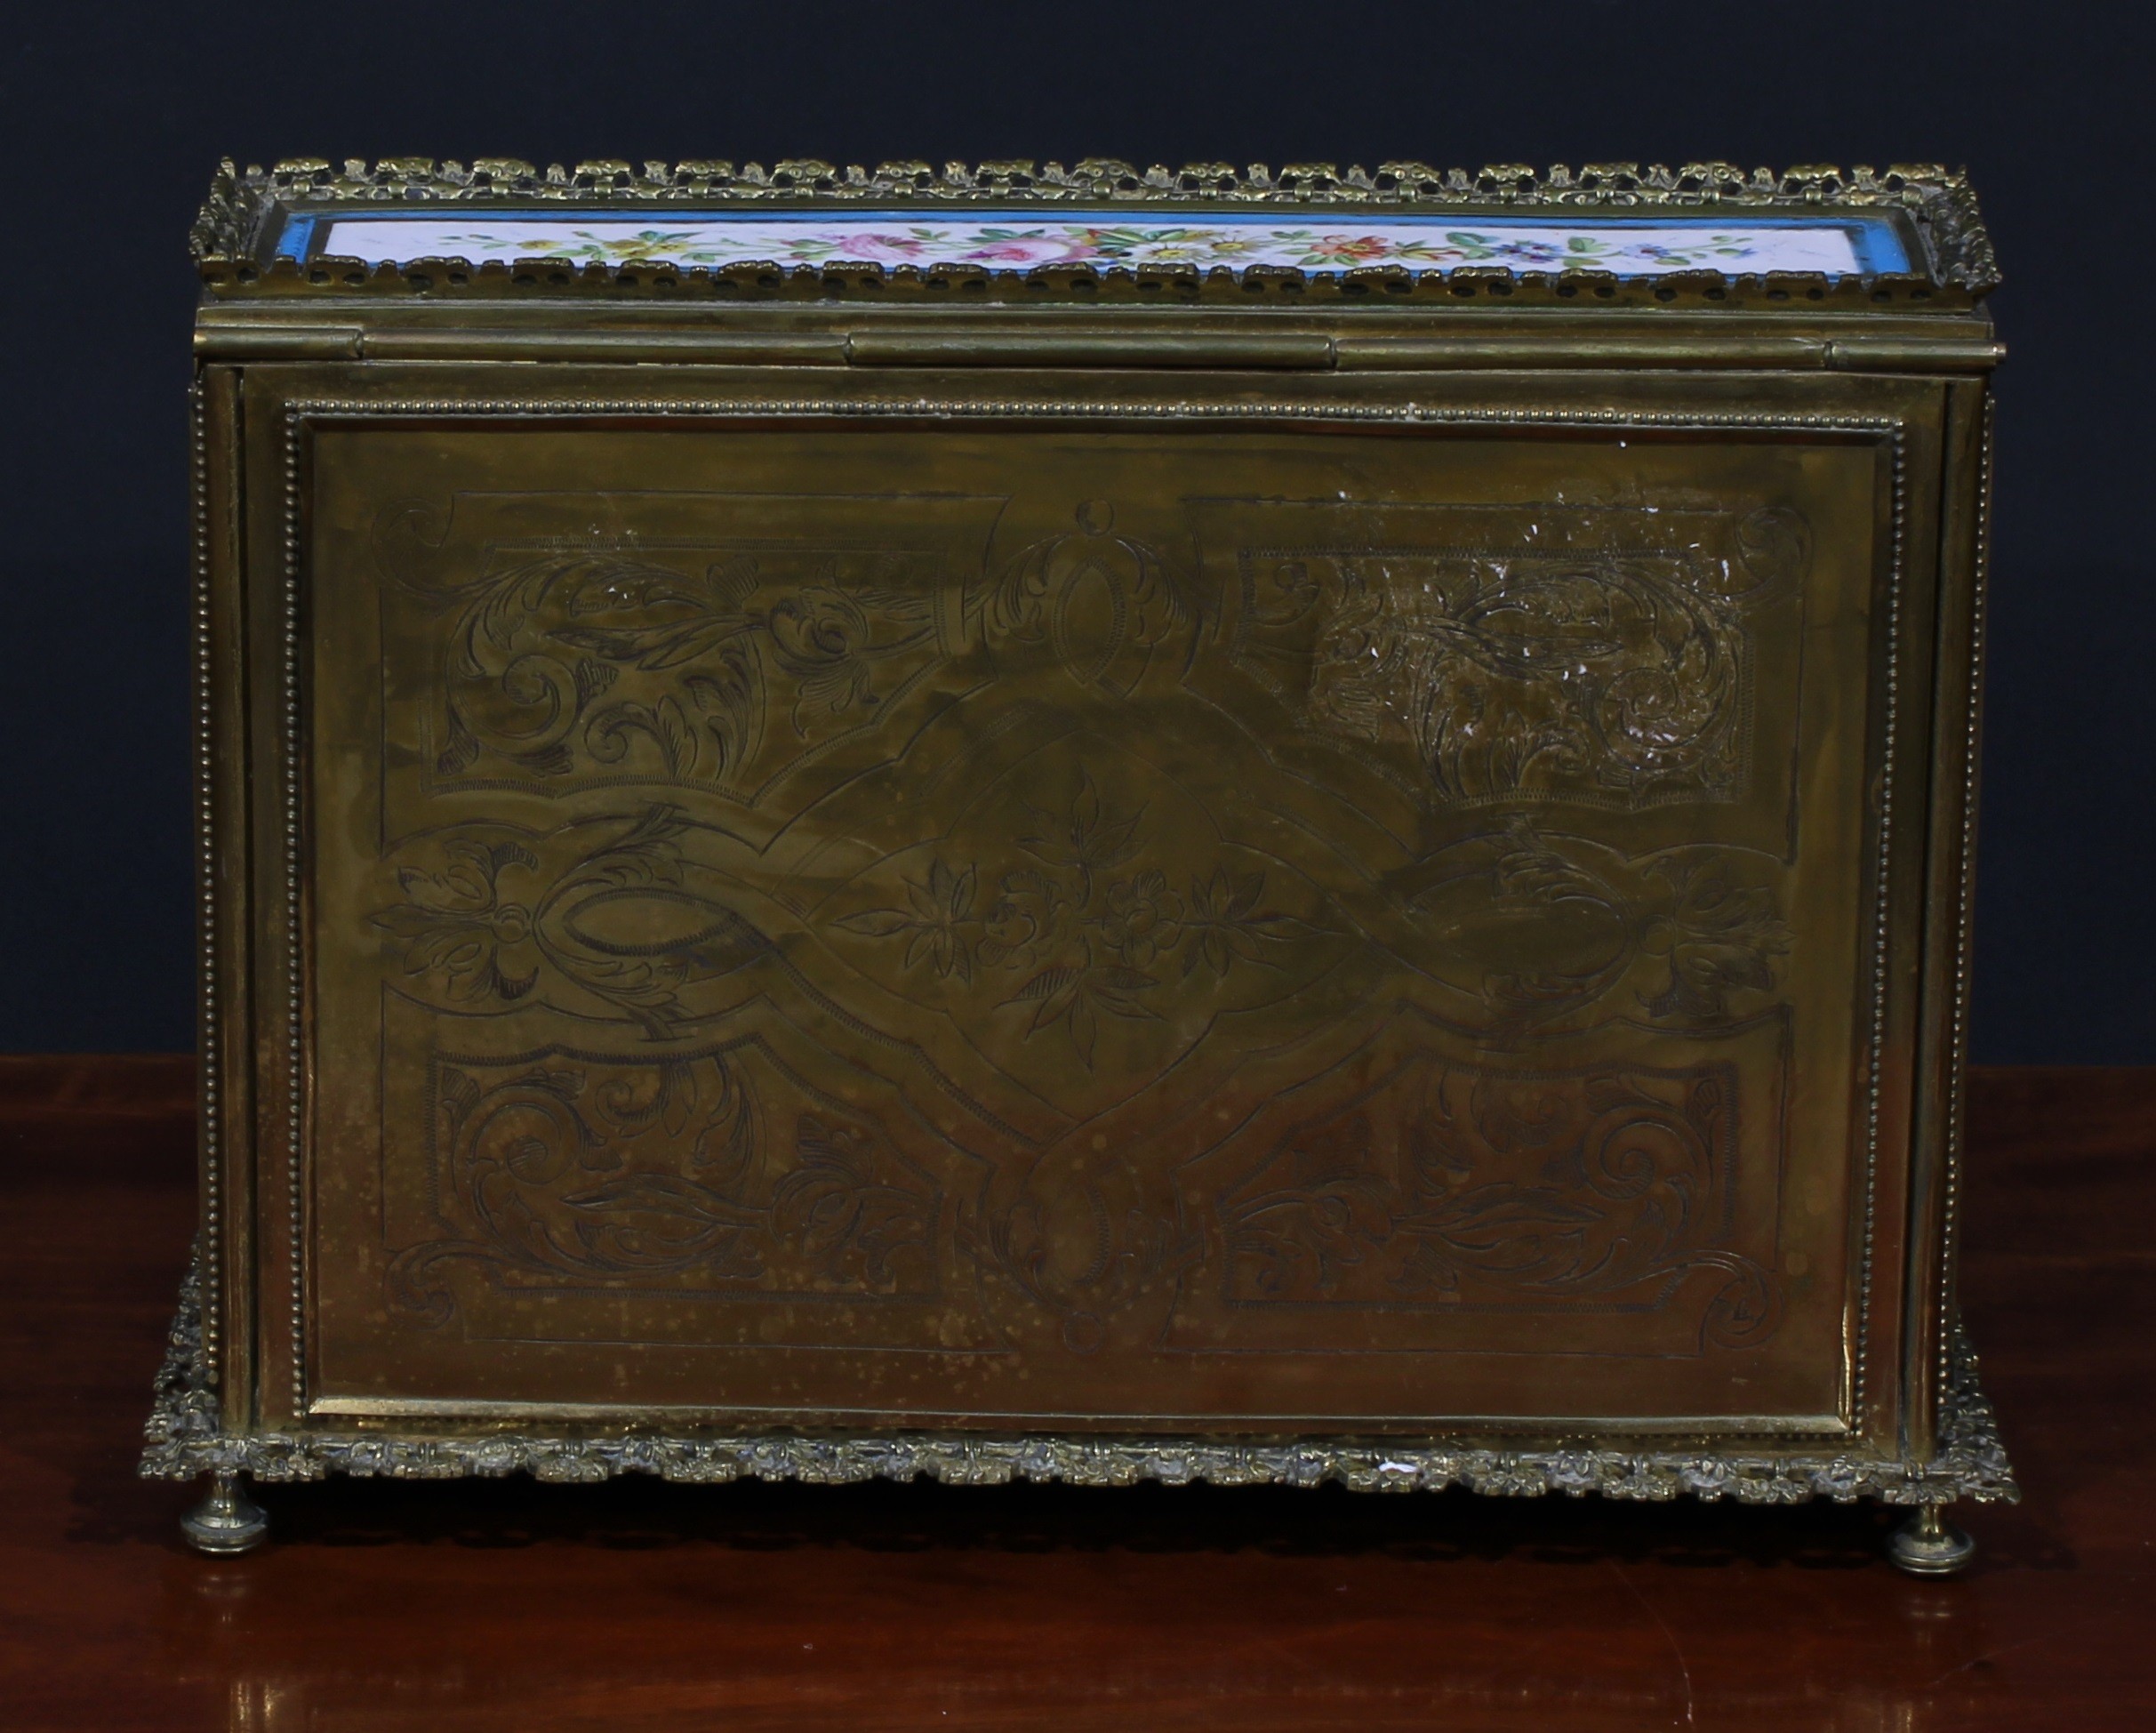 A 19th century French Palais Royal gilt metal and porcelain mounted table top writing and stationery - Image 6 of 6